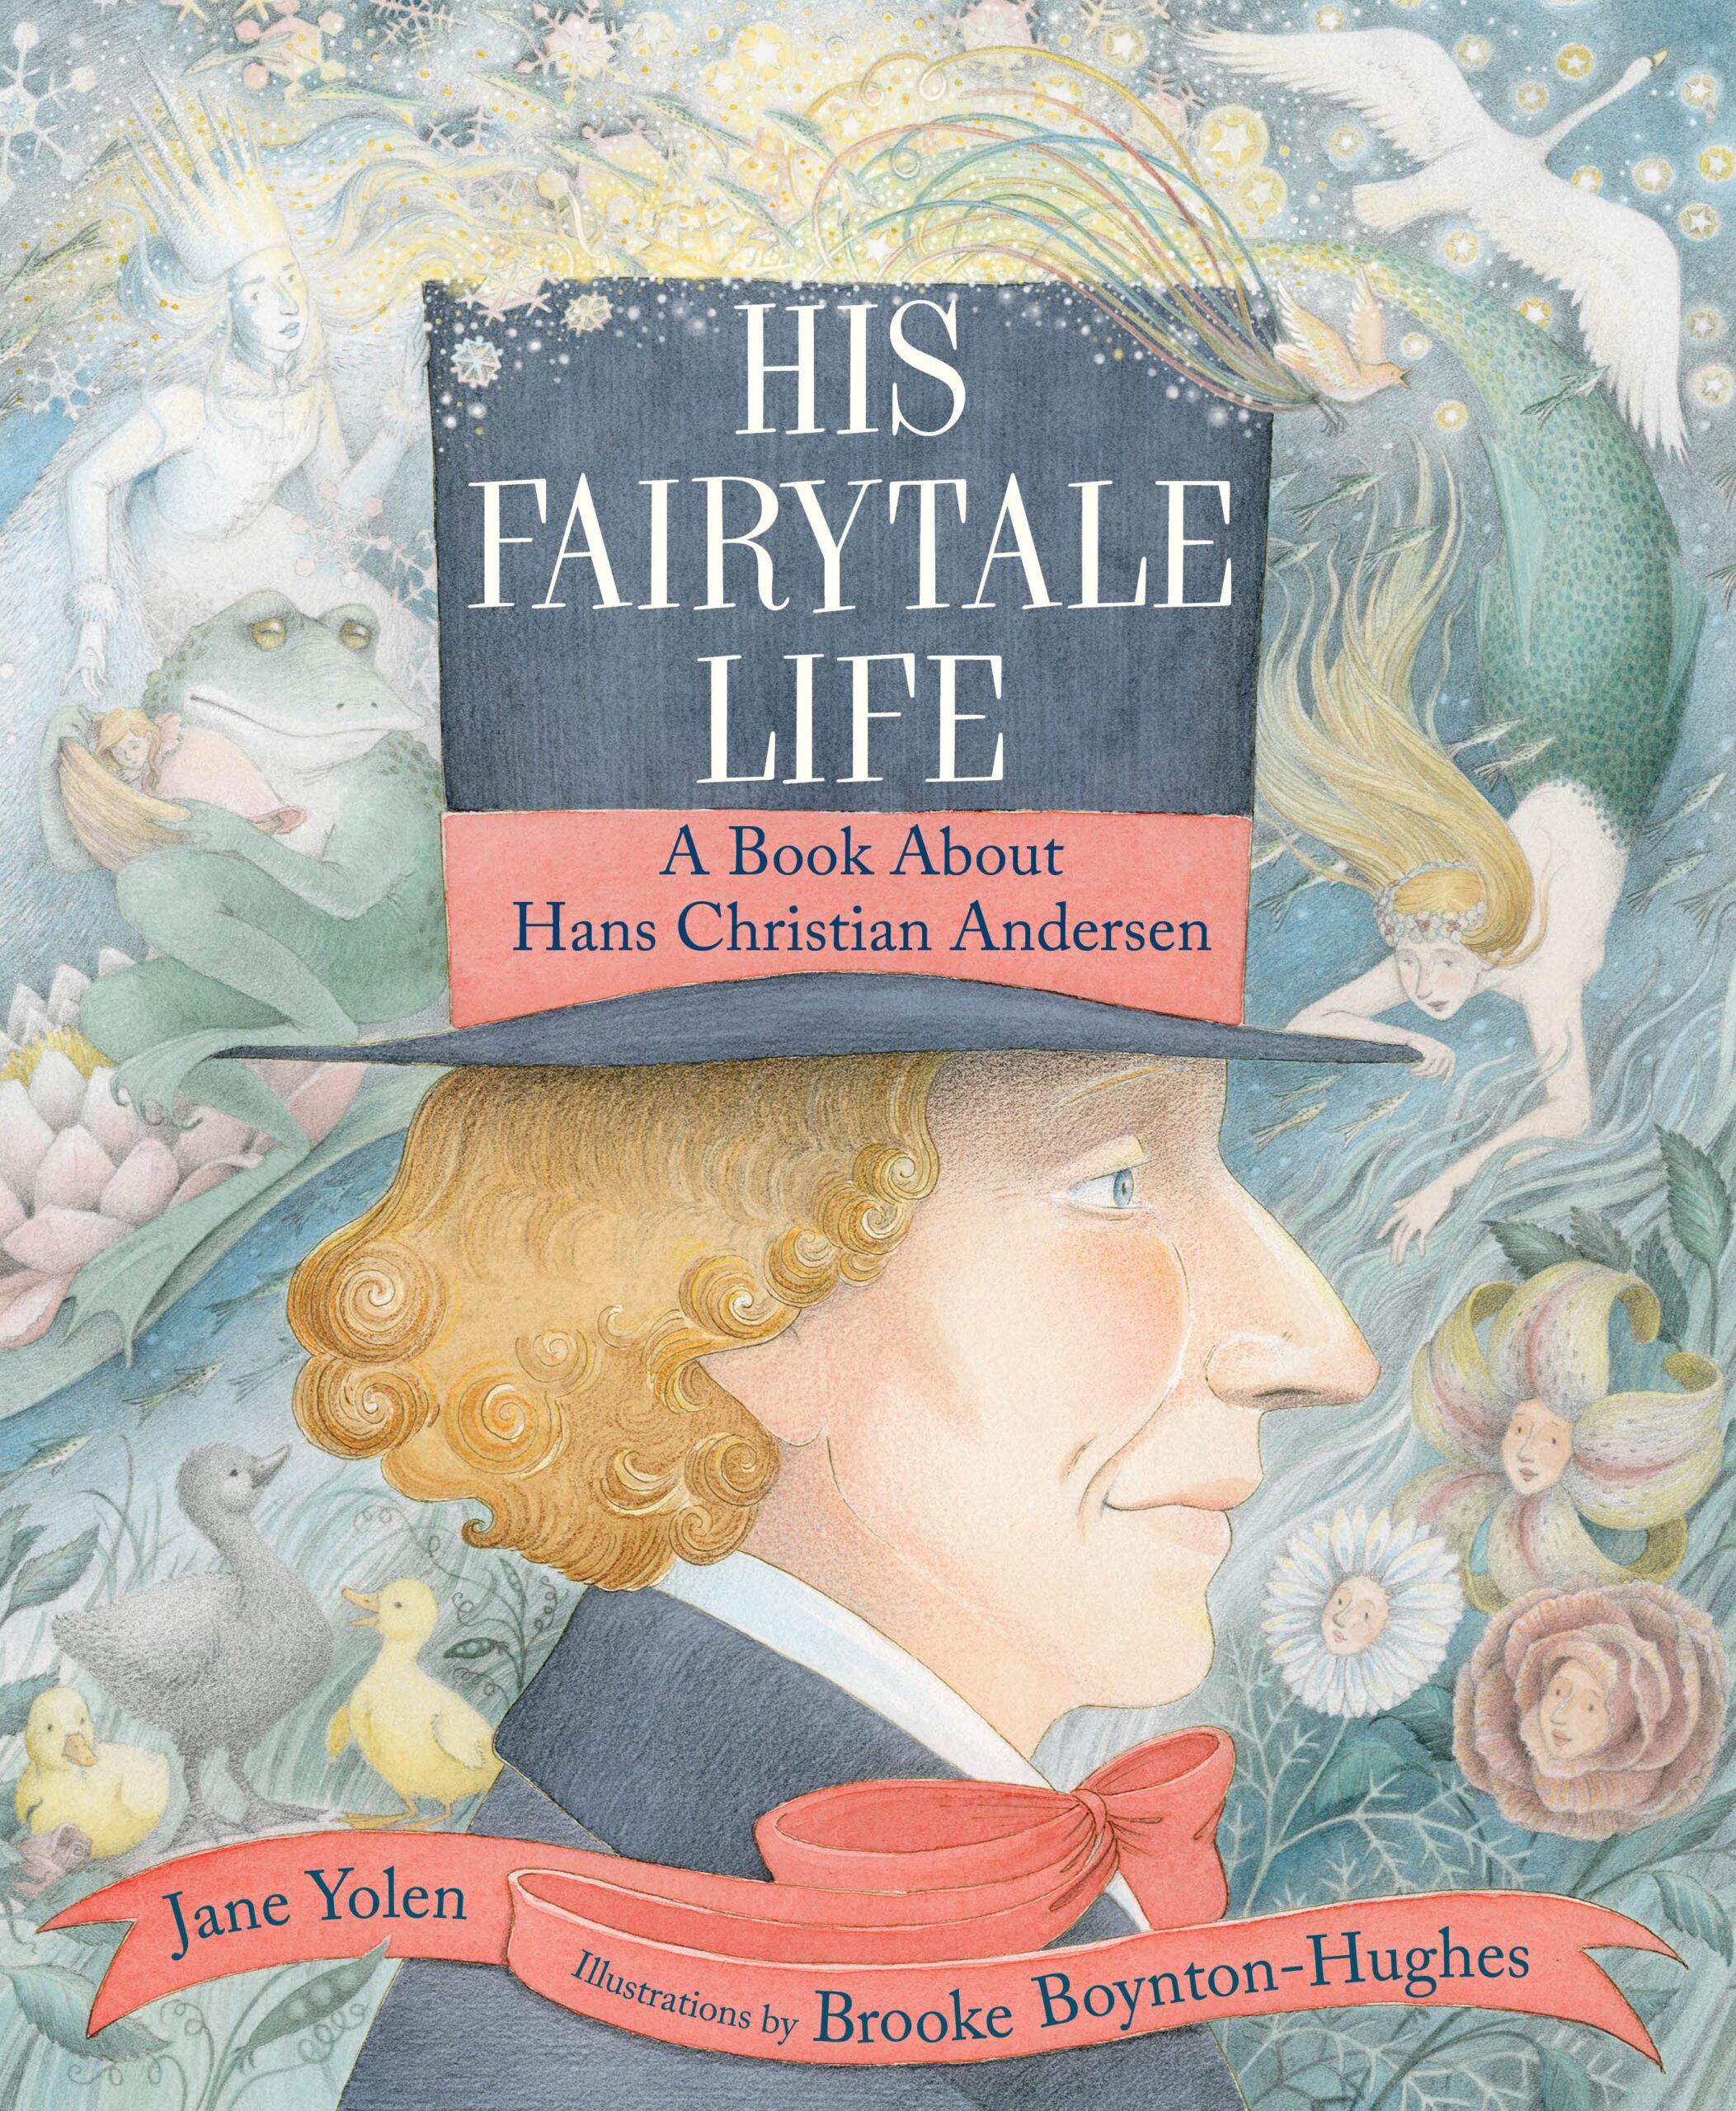 Exclusive Cover Reveal: HIS FAIRYTALE LIFE: A BOOK ABOUT HANS CHRISTIAN ANDERSEN by Jane Yolen and Brooke Boynton-Hughes